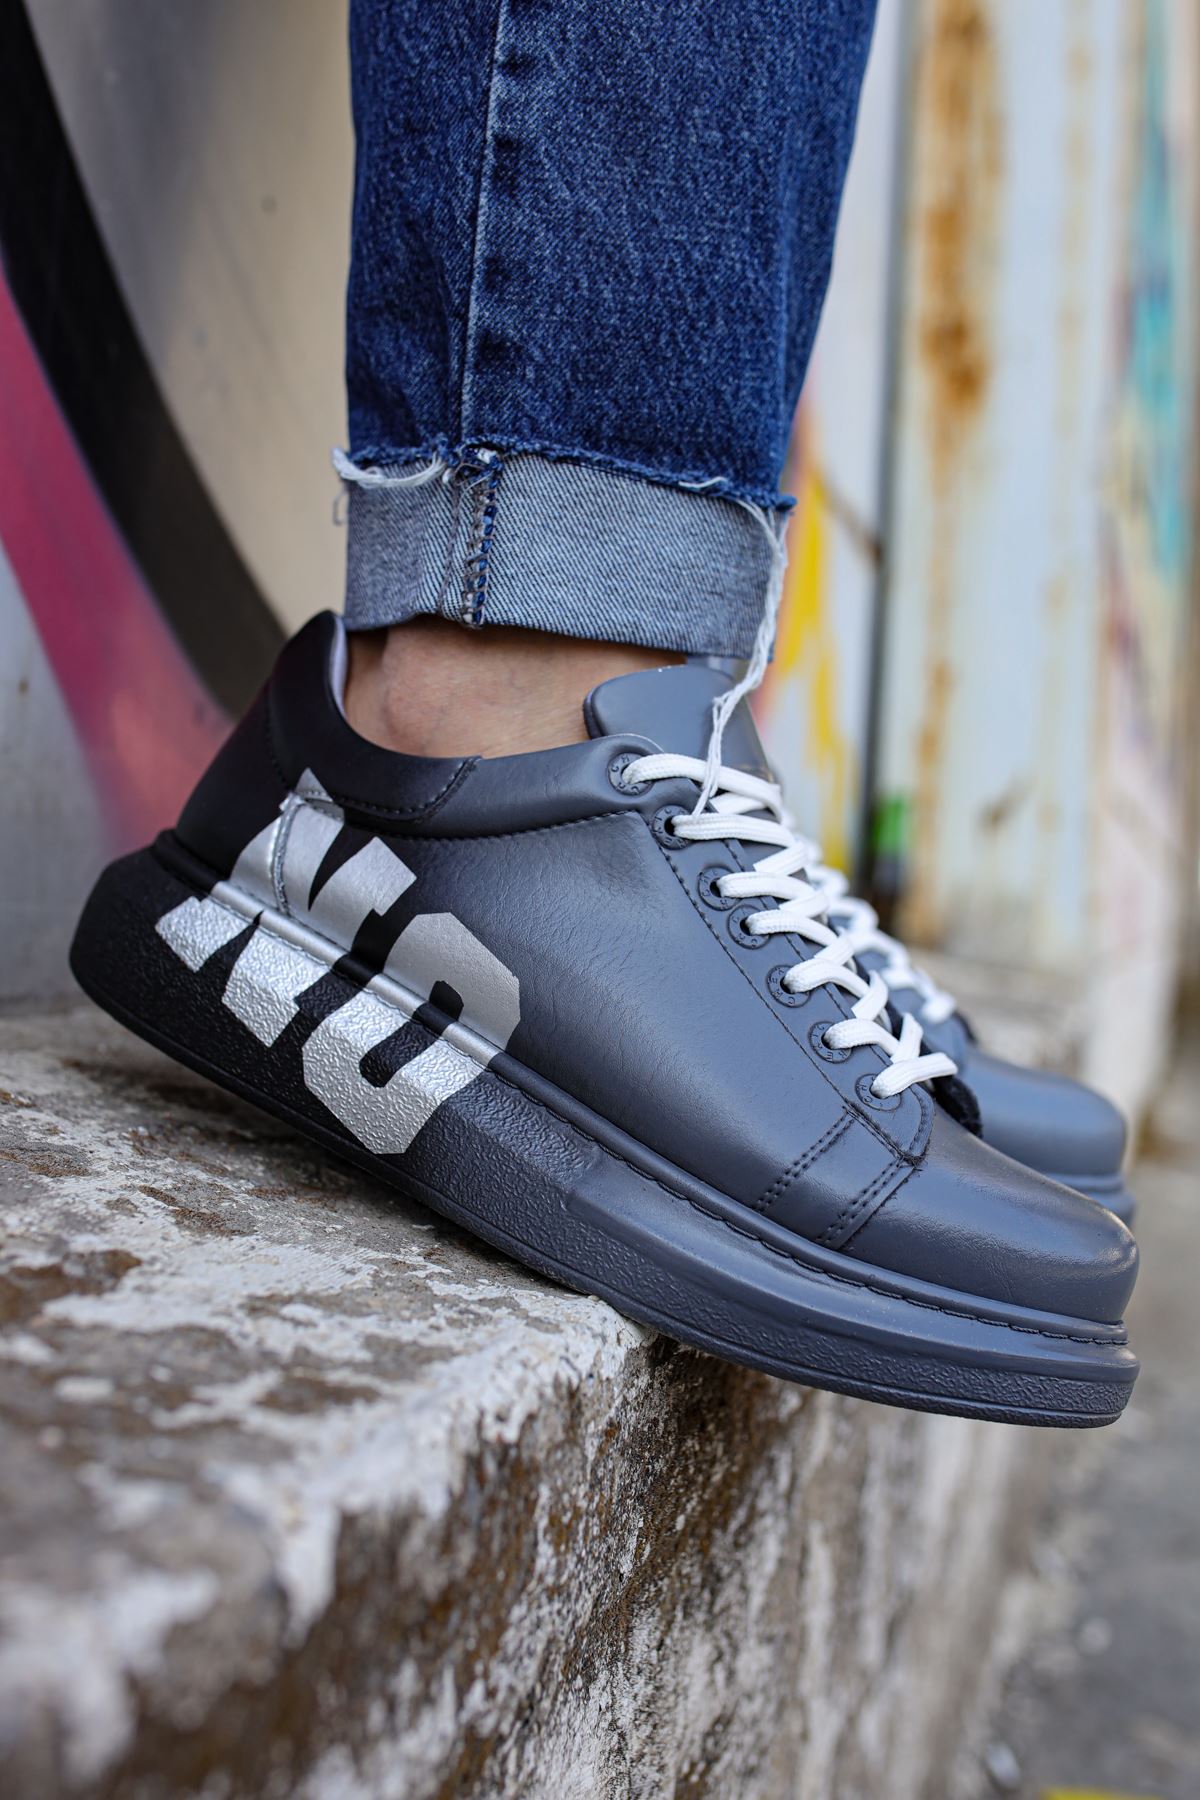 CH254 Men's Unisex Black-Grey Casual Sneaker Sports Shoes - STREETMODE ™